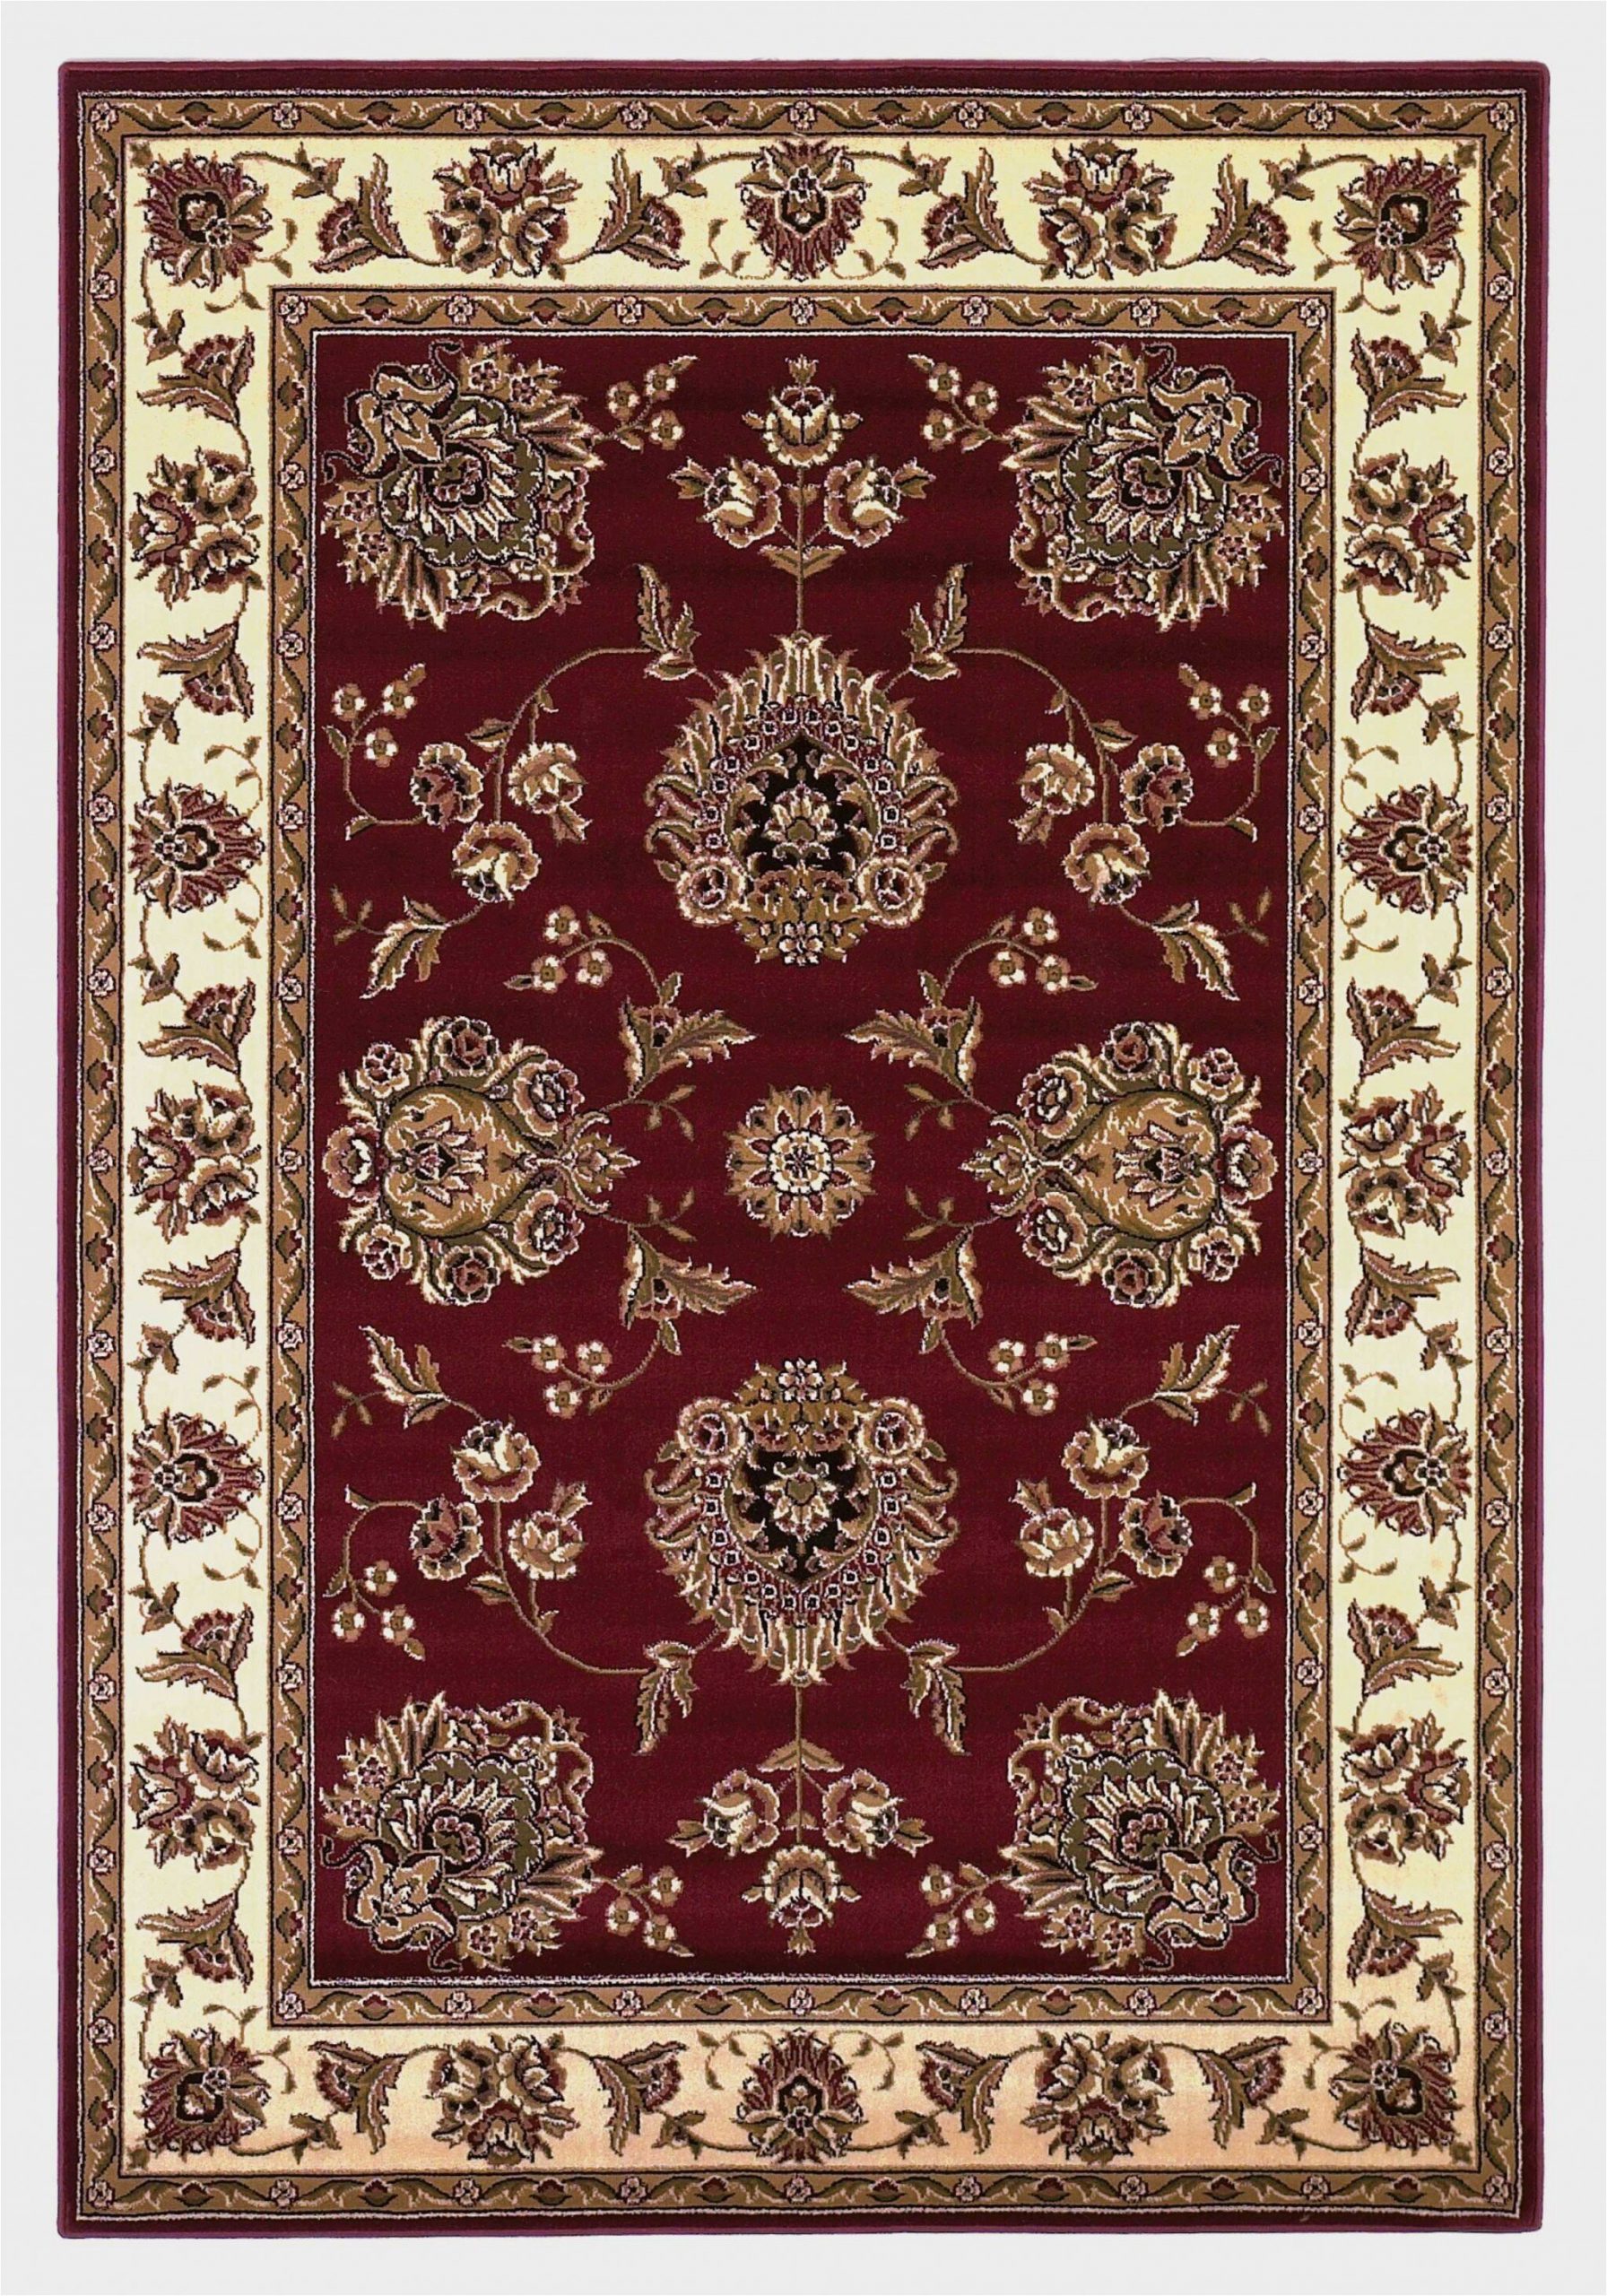 Fleur De Lis Rugs Bed Bath and Beyond Stian Red Ivory Rug